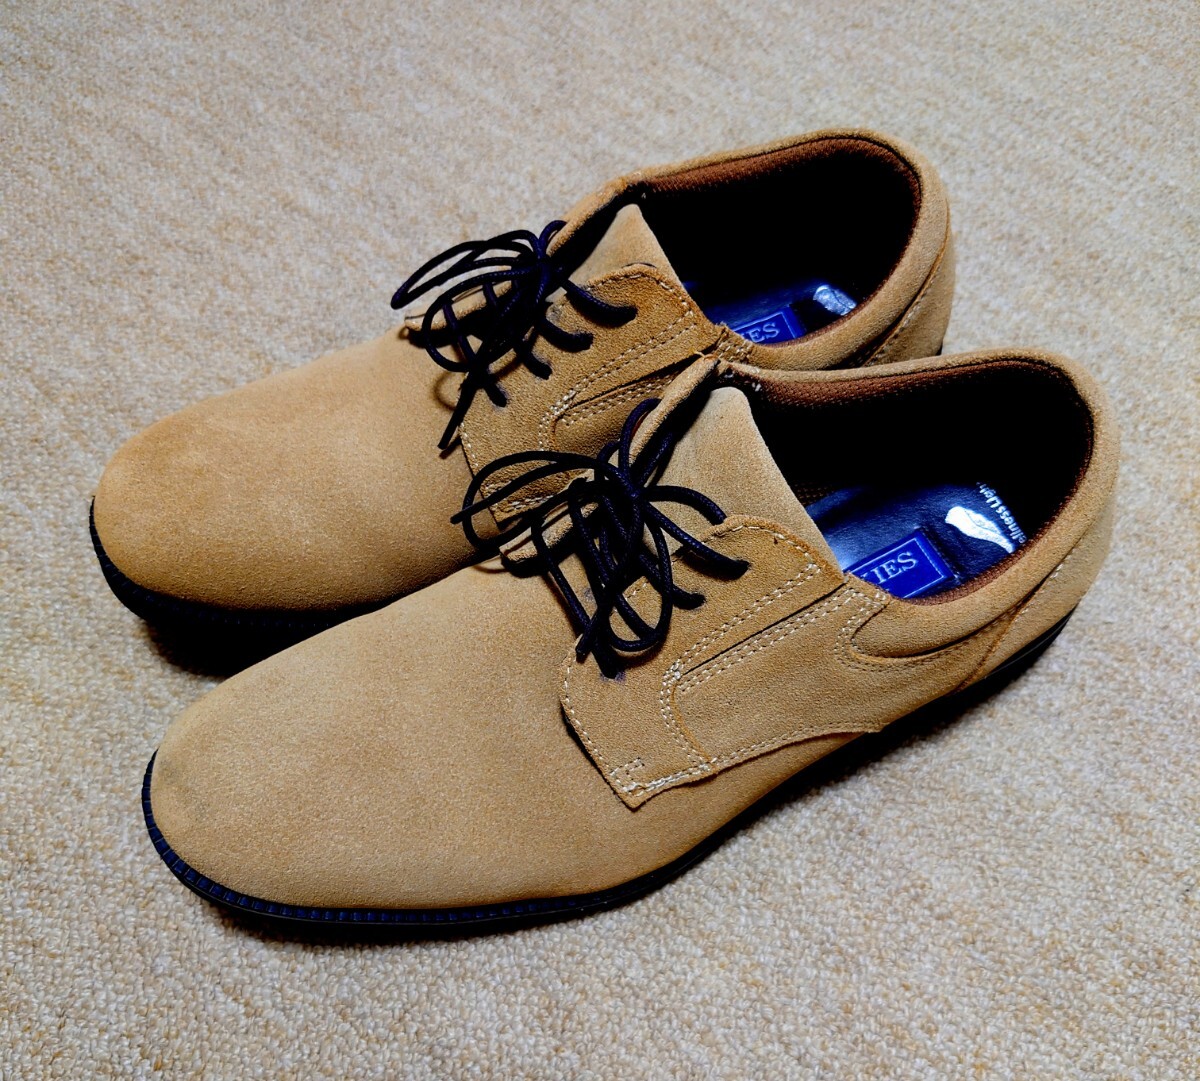  as good as new shoes men's .-ju25cm( 25.5cm. corresponding ) light weight low repulsion height repulsion legs. . wide 2E